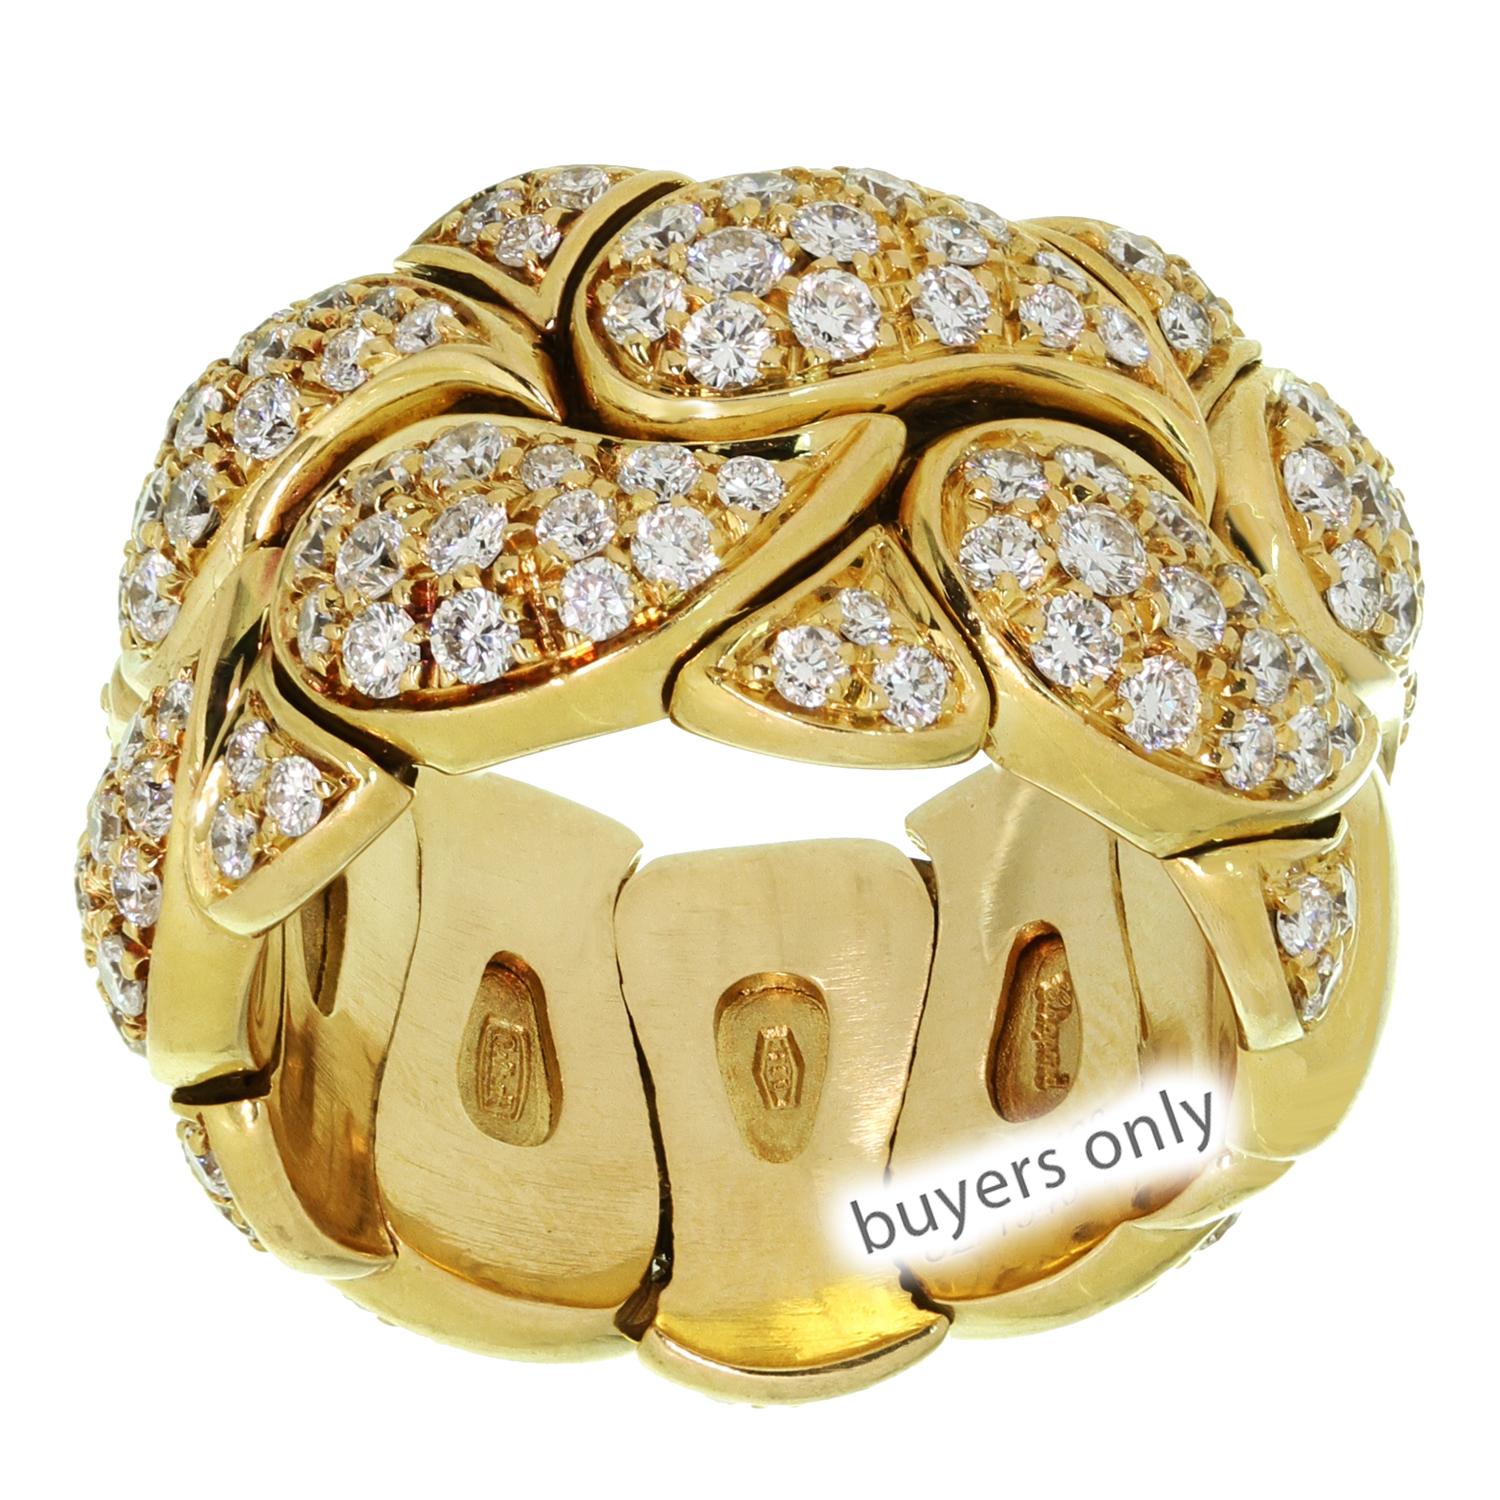 This fabulous Chopard ring from the elegant Casmir collection features a cuff band composed of paisley motifs crafted in 18k yellow gold and set with brilliant-cut round F-G VVS2-VS1 diamonds. Made in Switzerland circa 1990s. Measurements: 0.51